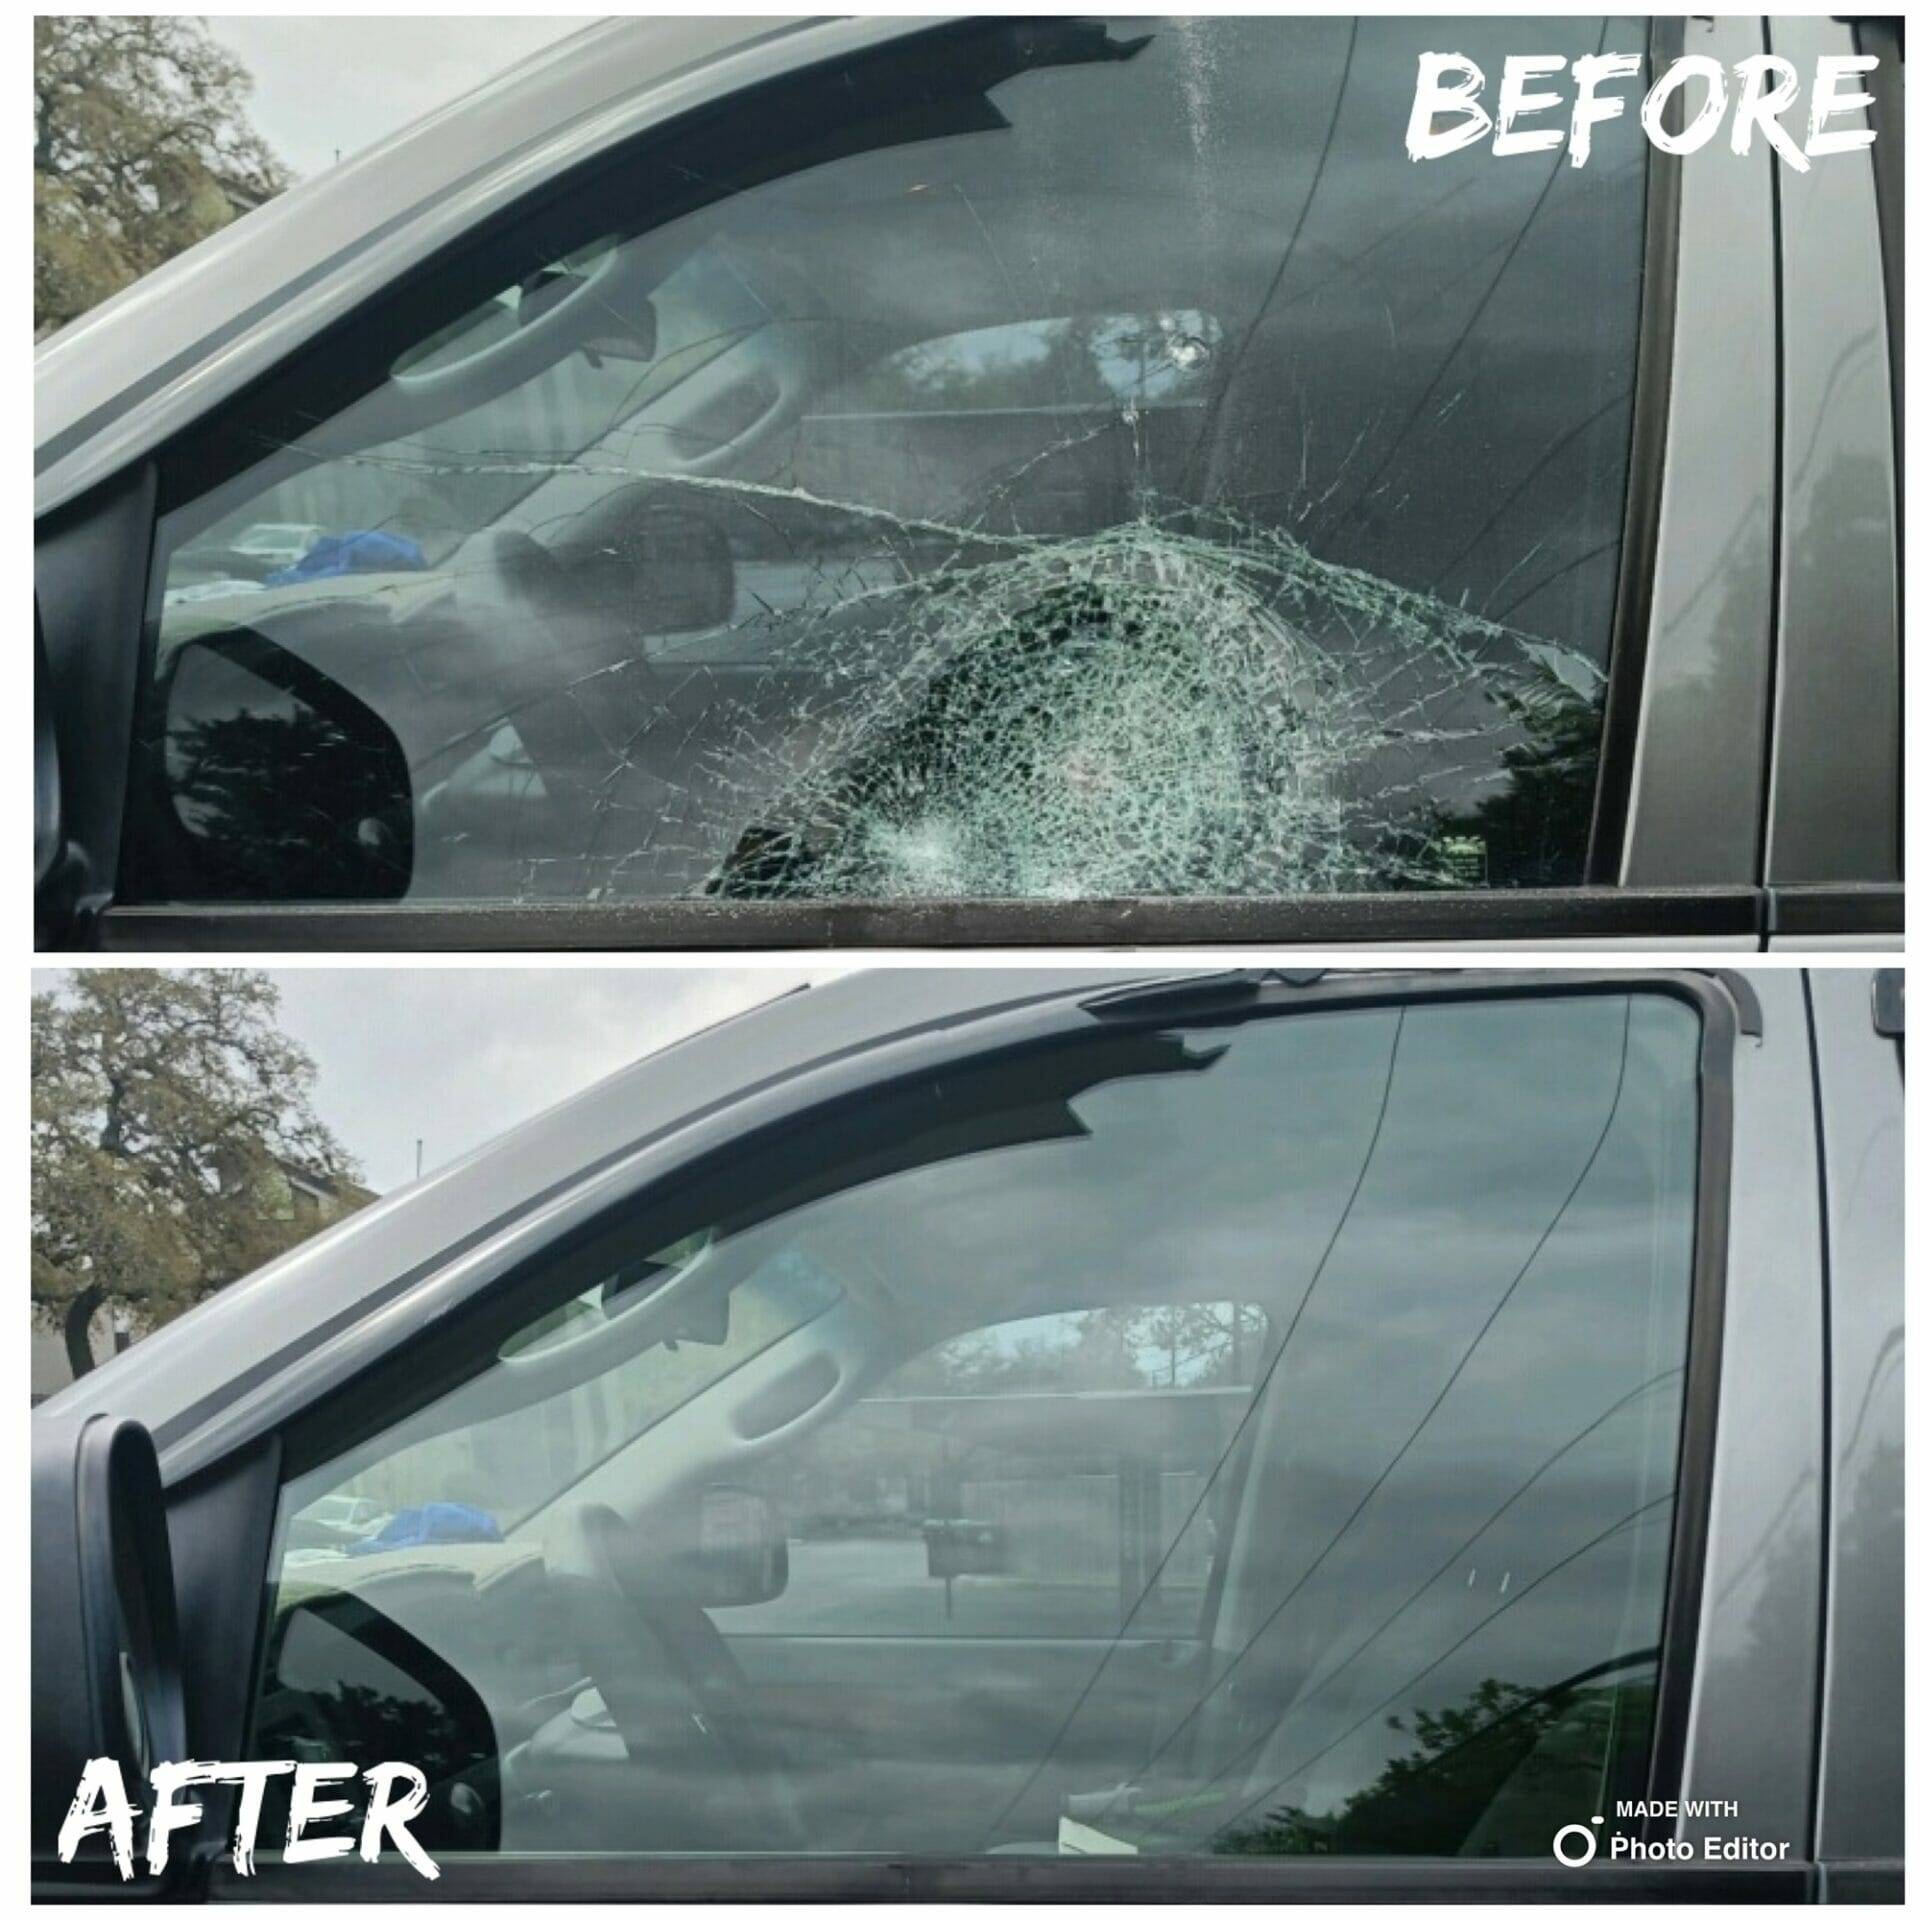 A split image displaying a before-and-after comparison of a pickup truck's driver side left front laminated door glass in Fiesta Texas Six Flags, San Antonio, Texas. The top half reveals the initial damage with several cracks from an attempted burglary. The bottom half shows the repaired state of the door glass after a home auto glass appointment.